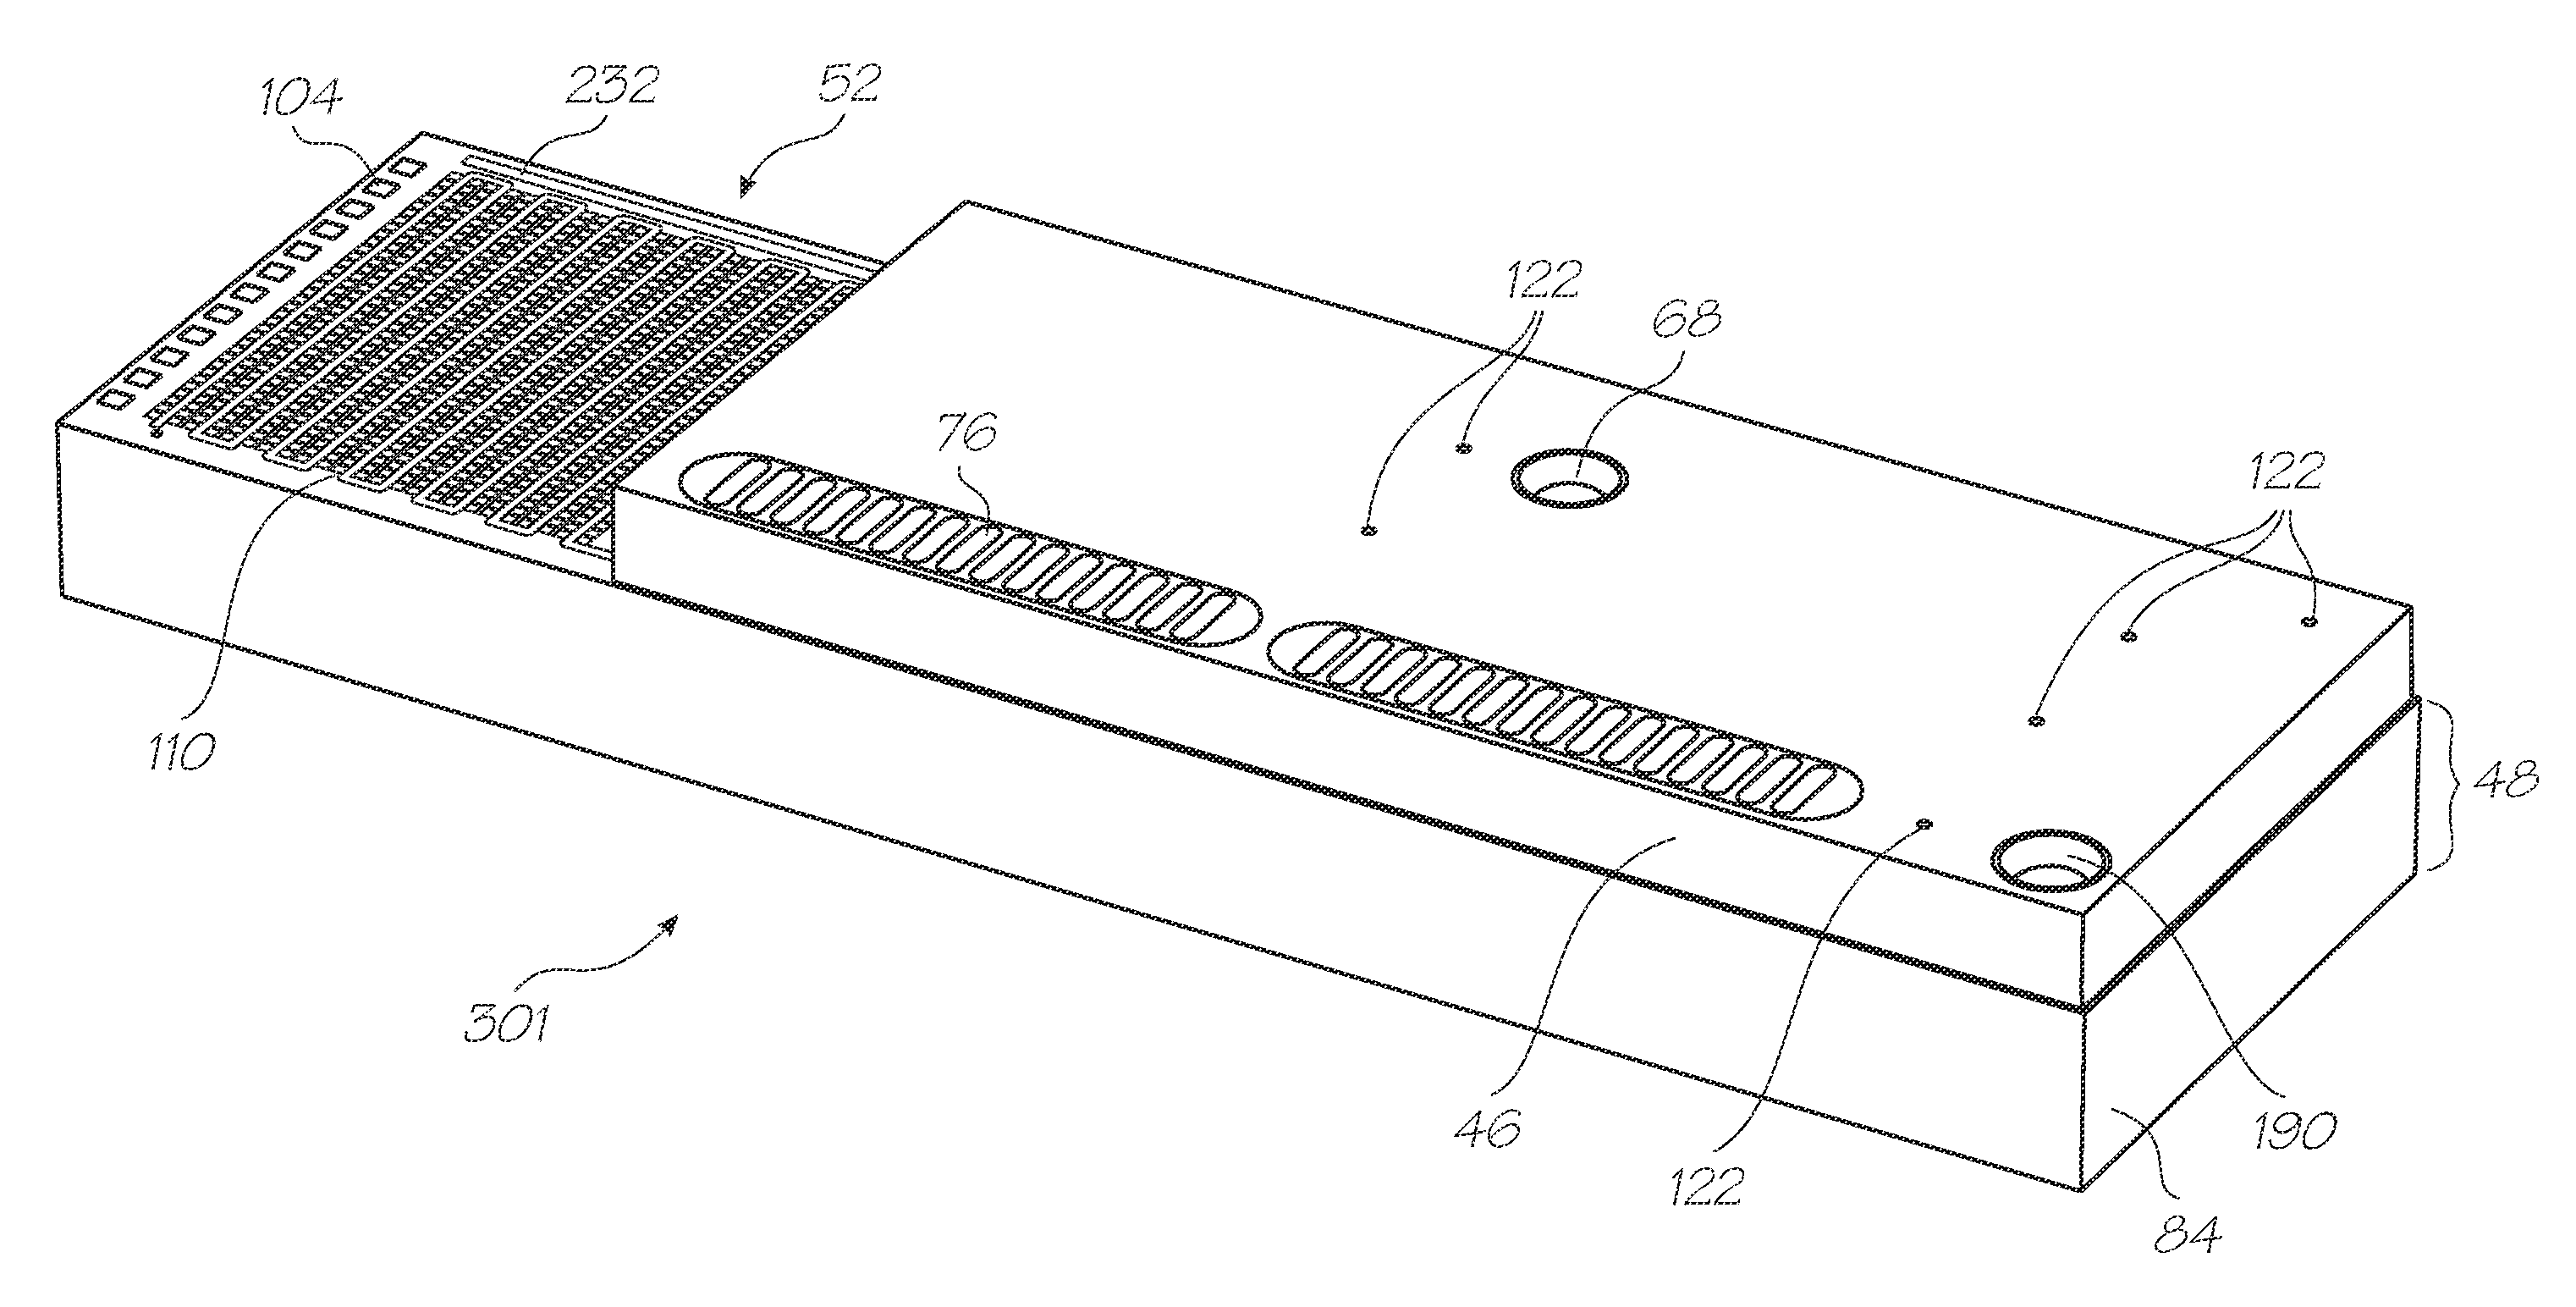 Loc device with hybridization chambers containing probes for electrochemiluminescent detection of target nucleic acid sequences in a fluid and calibration chamber containing probes sealed from the fluid